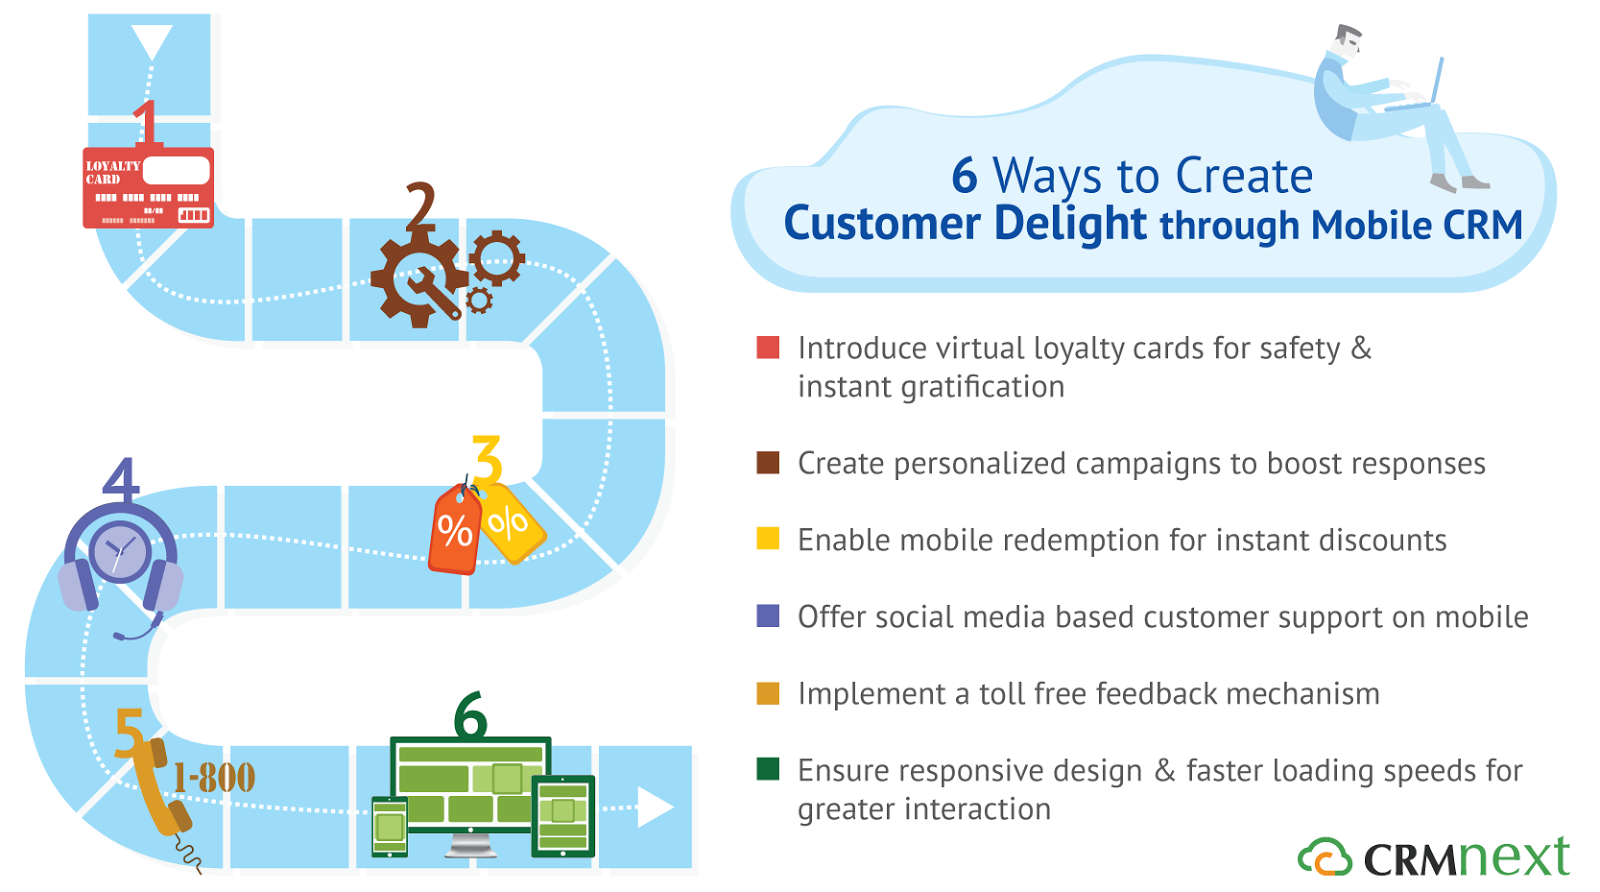 6 Ways to Create Customer Delight Through Mobile CRM